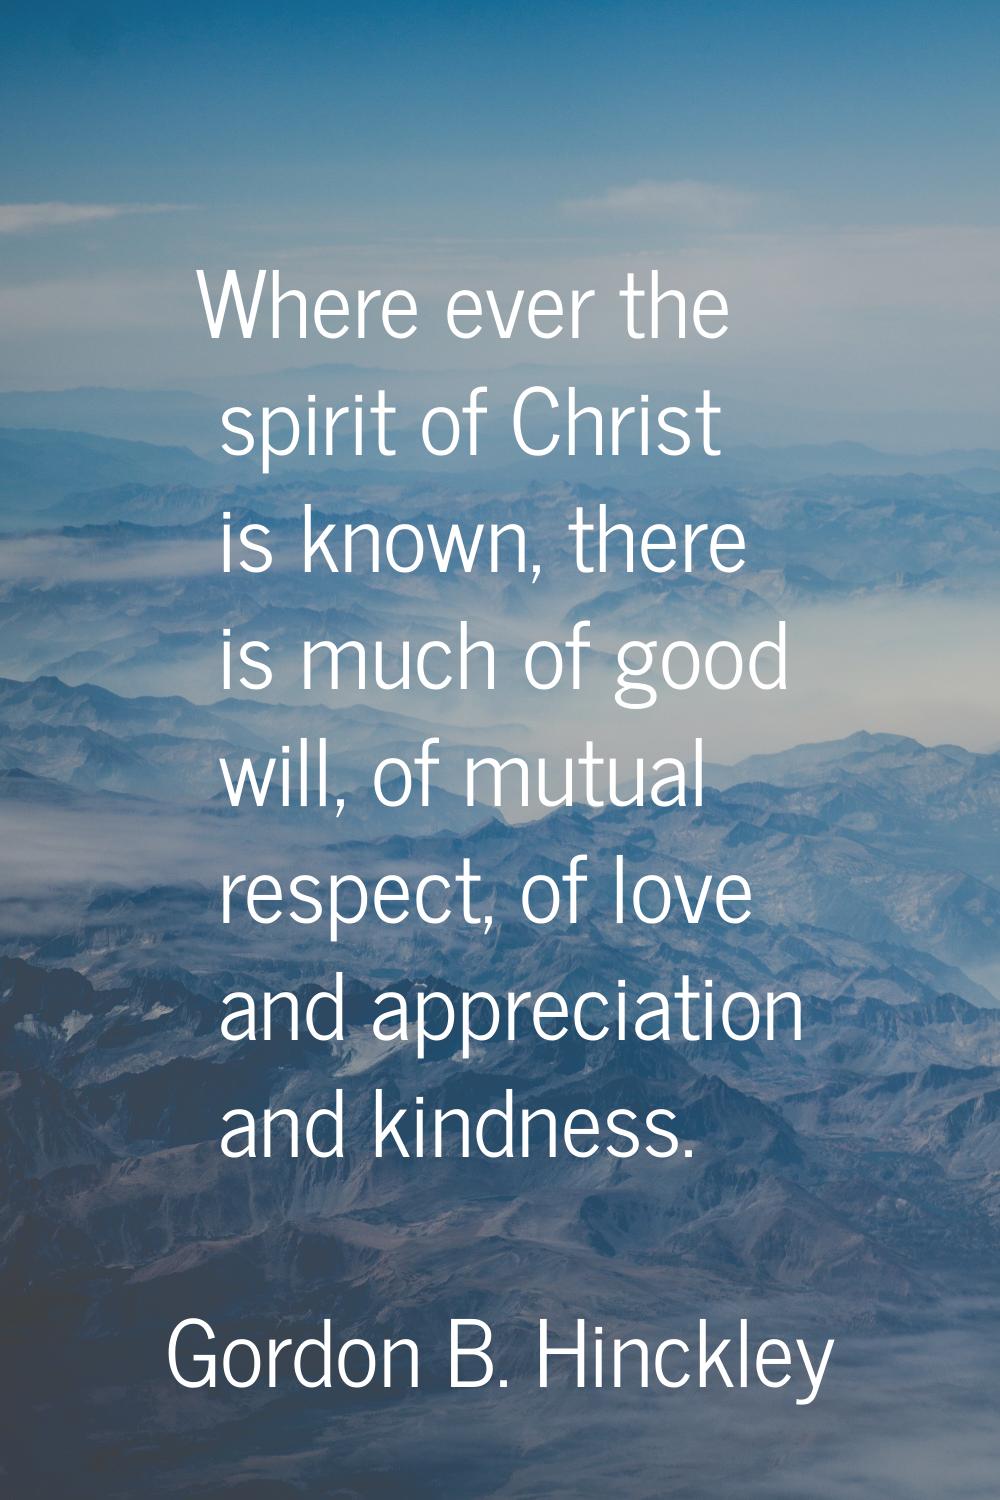 Where ever the spirit of Christ is known, there is much of good will, of mutual respect, of love an